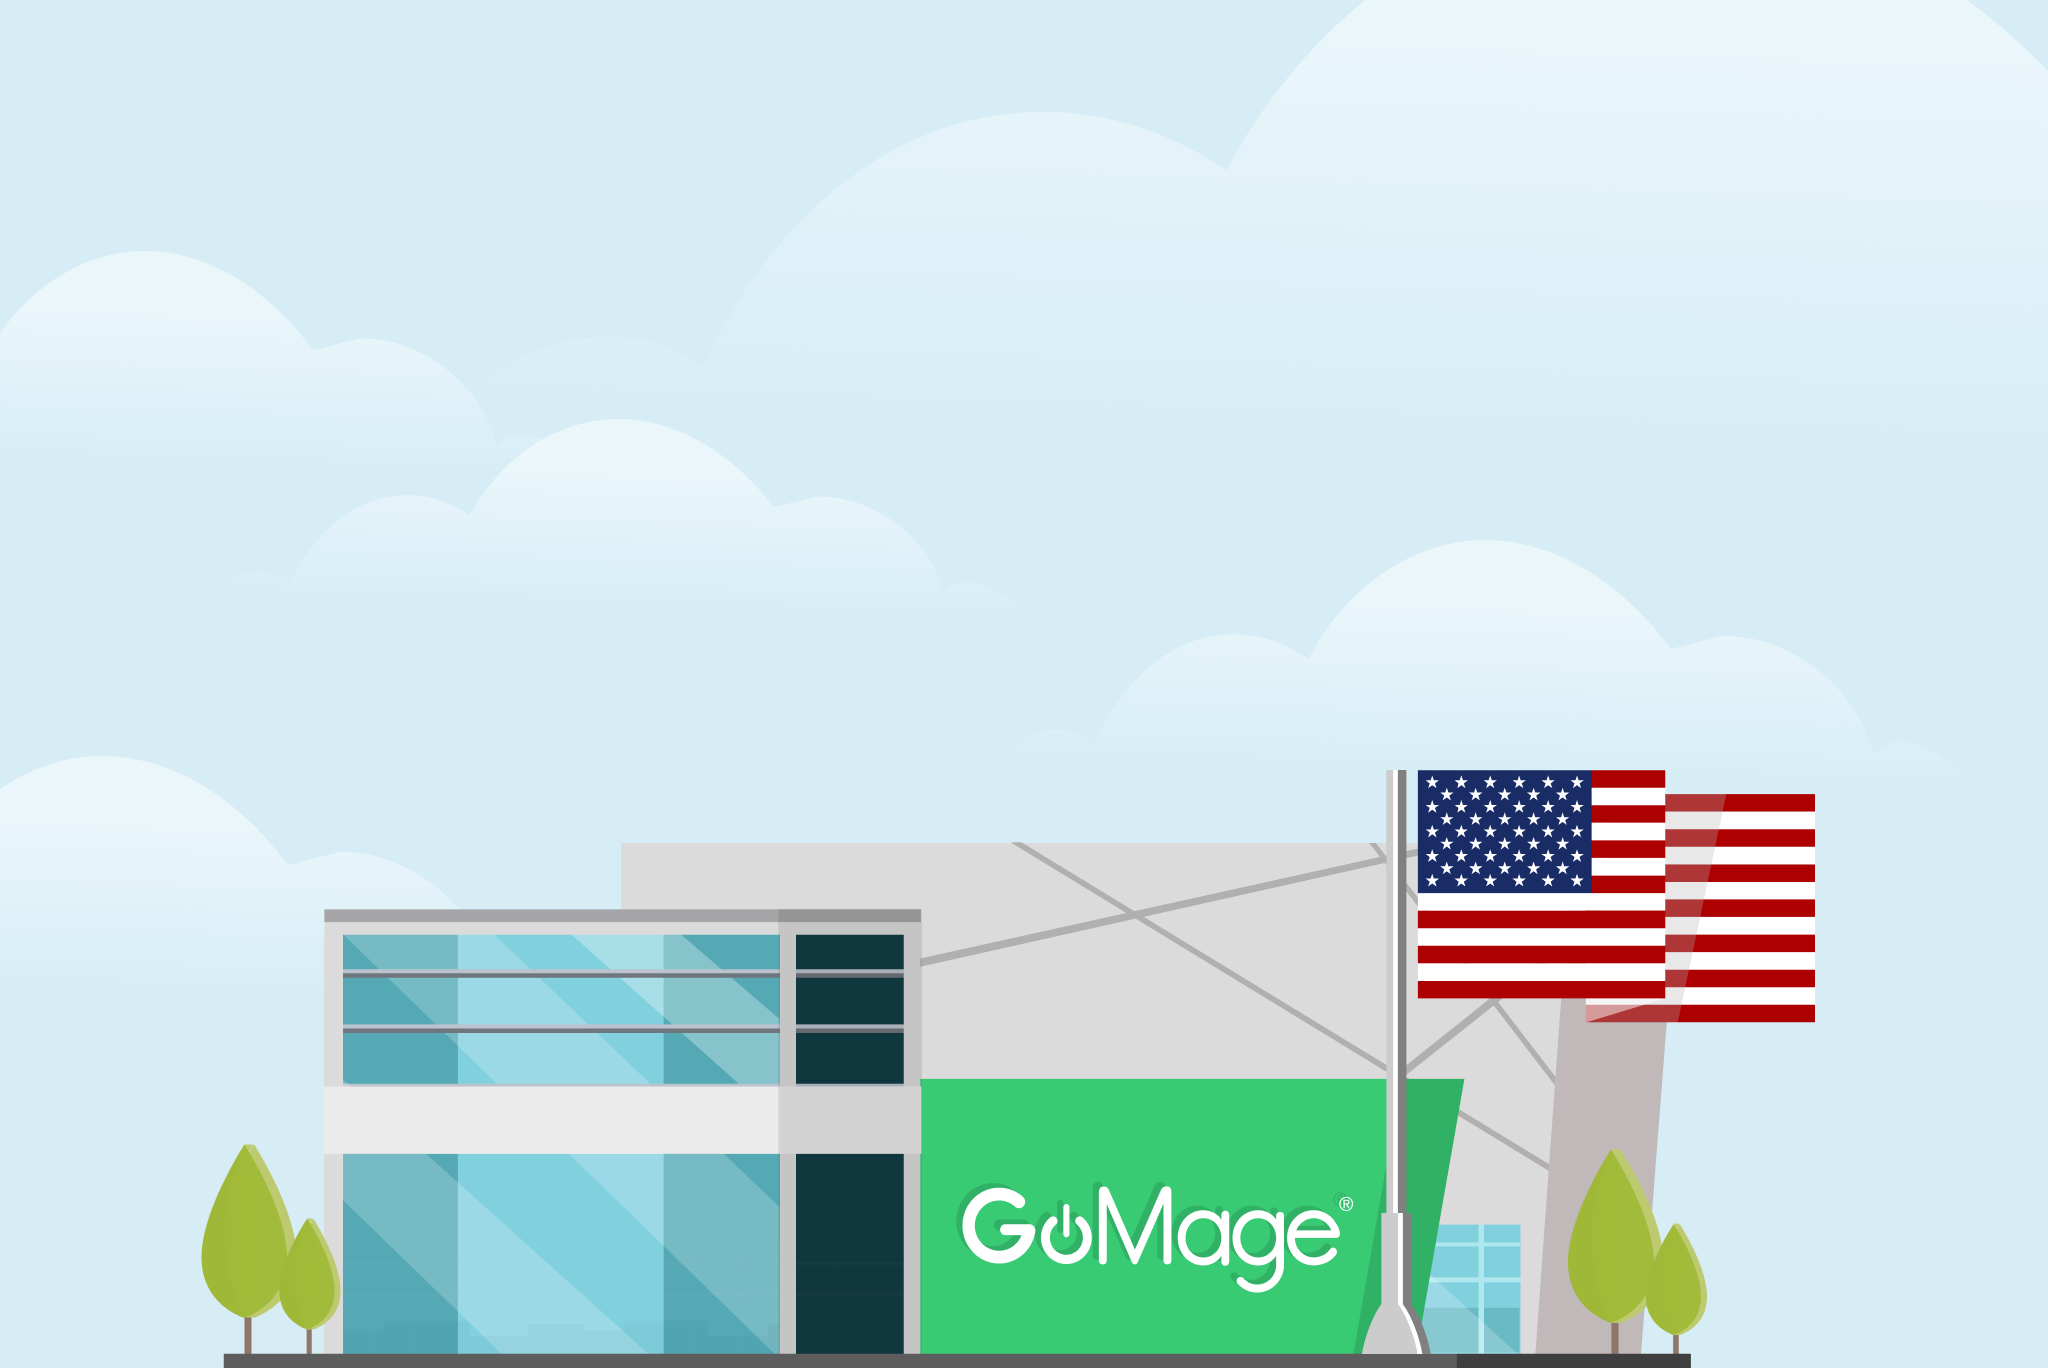 GoMage office next to the United States flag